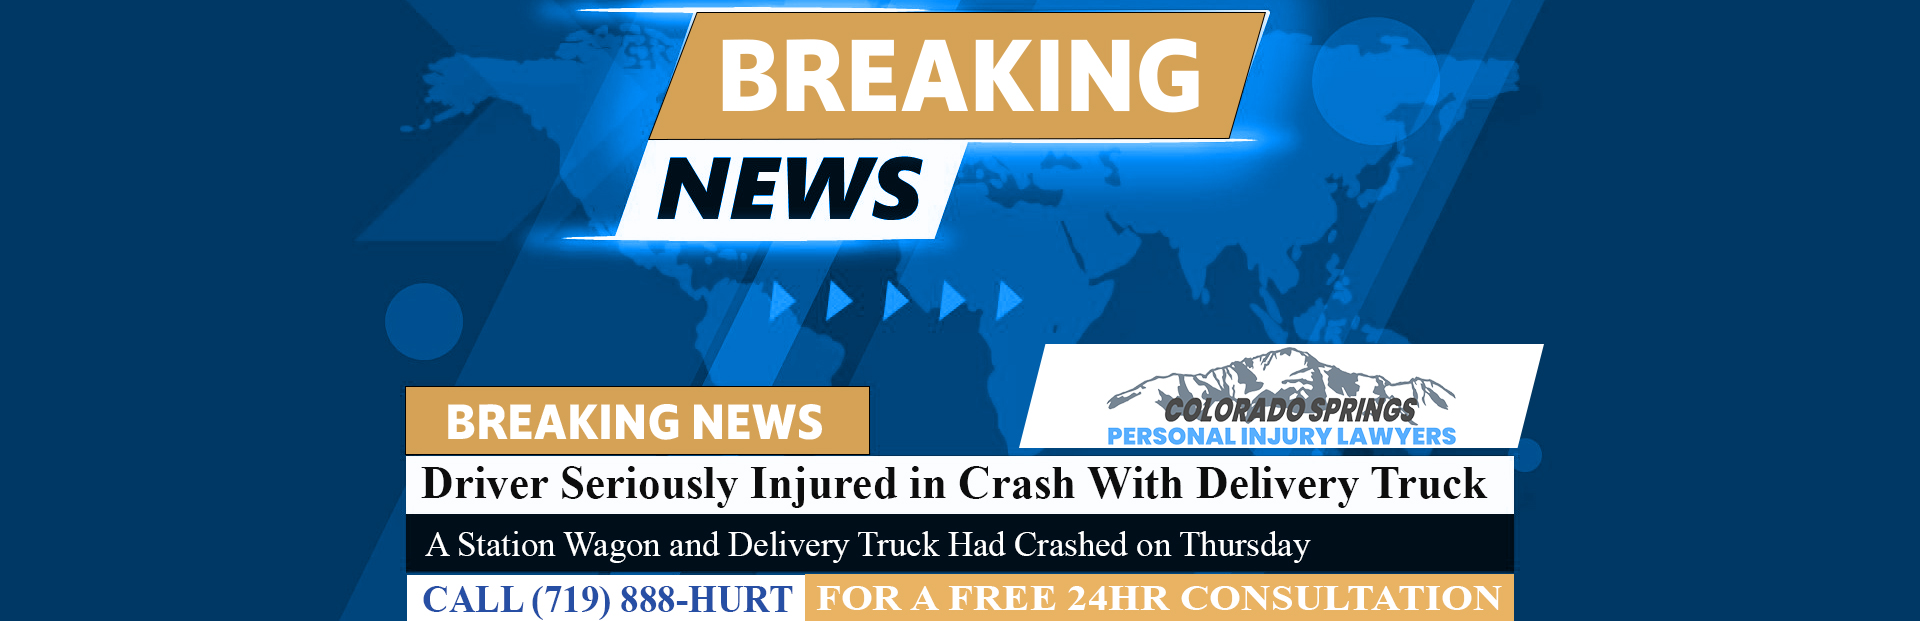 [09-29-23] Driver Seriously Injured in Crash With Delivery Truck